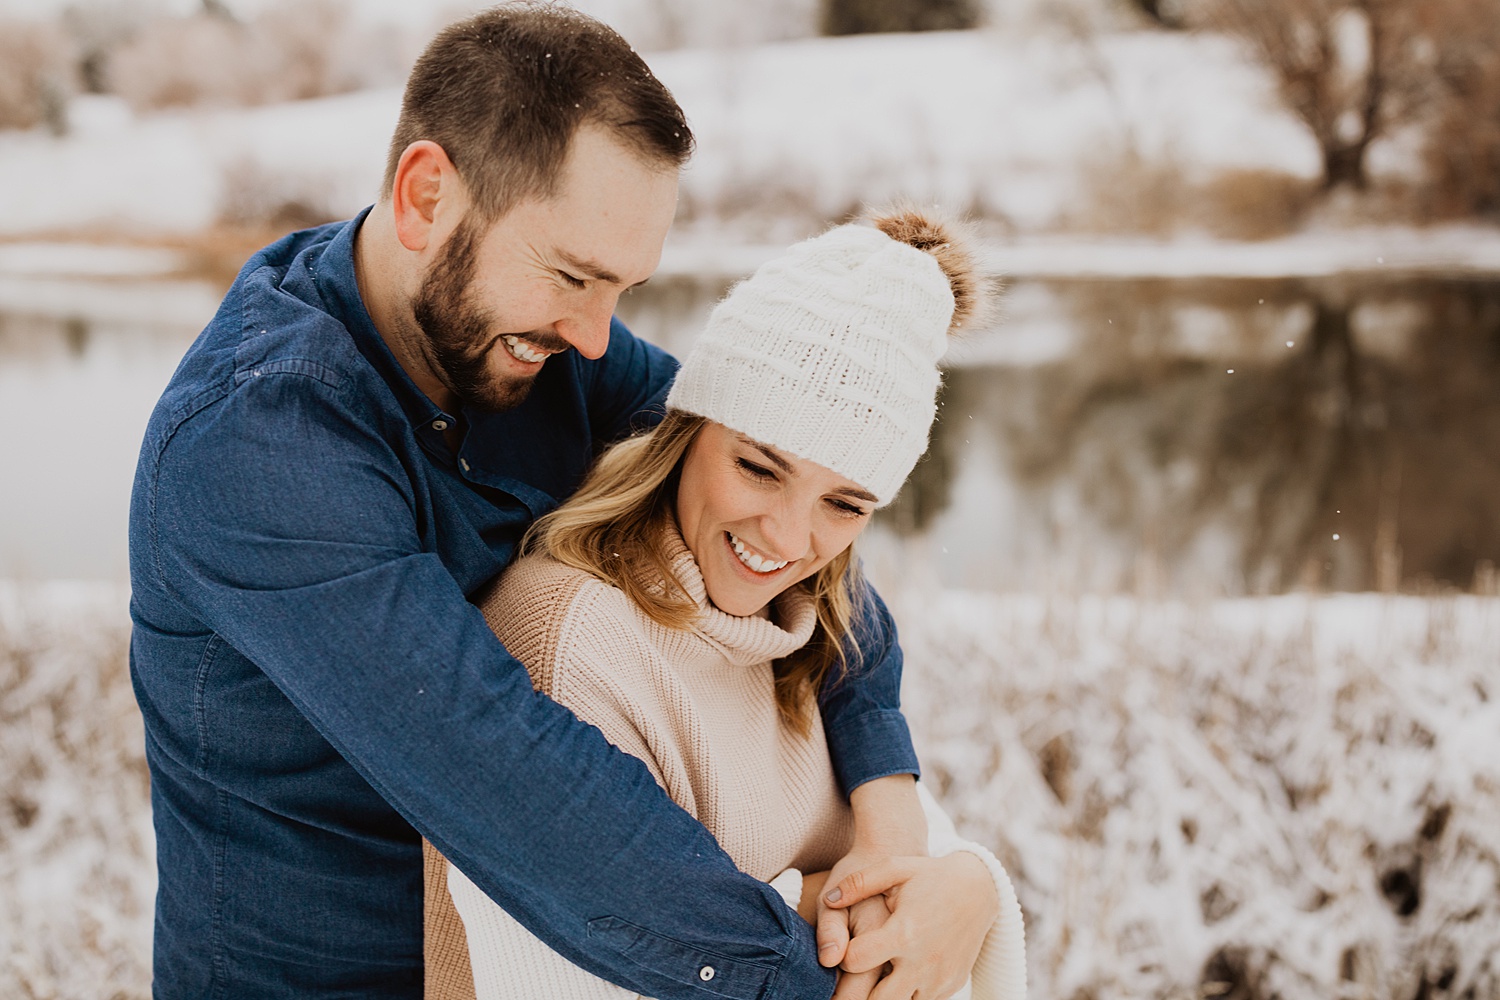 Snow Engagement Photos | Winter Engagement Outfits | Colorado Winter Engagement Photos | Engagement Photos with Kids | Cassie Madden Photography